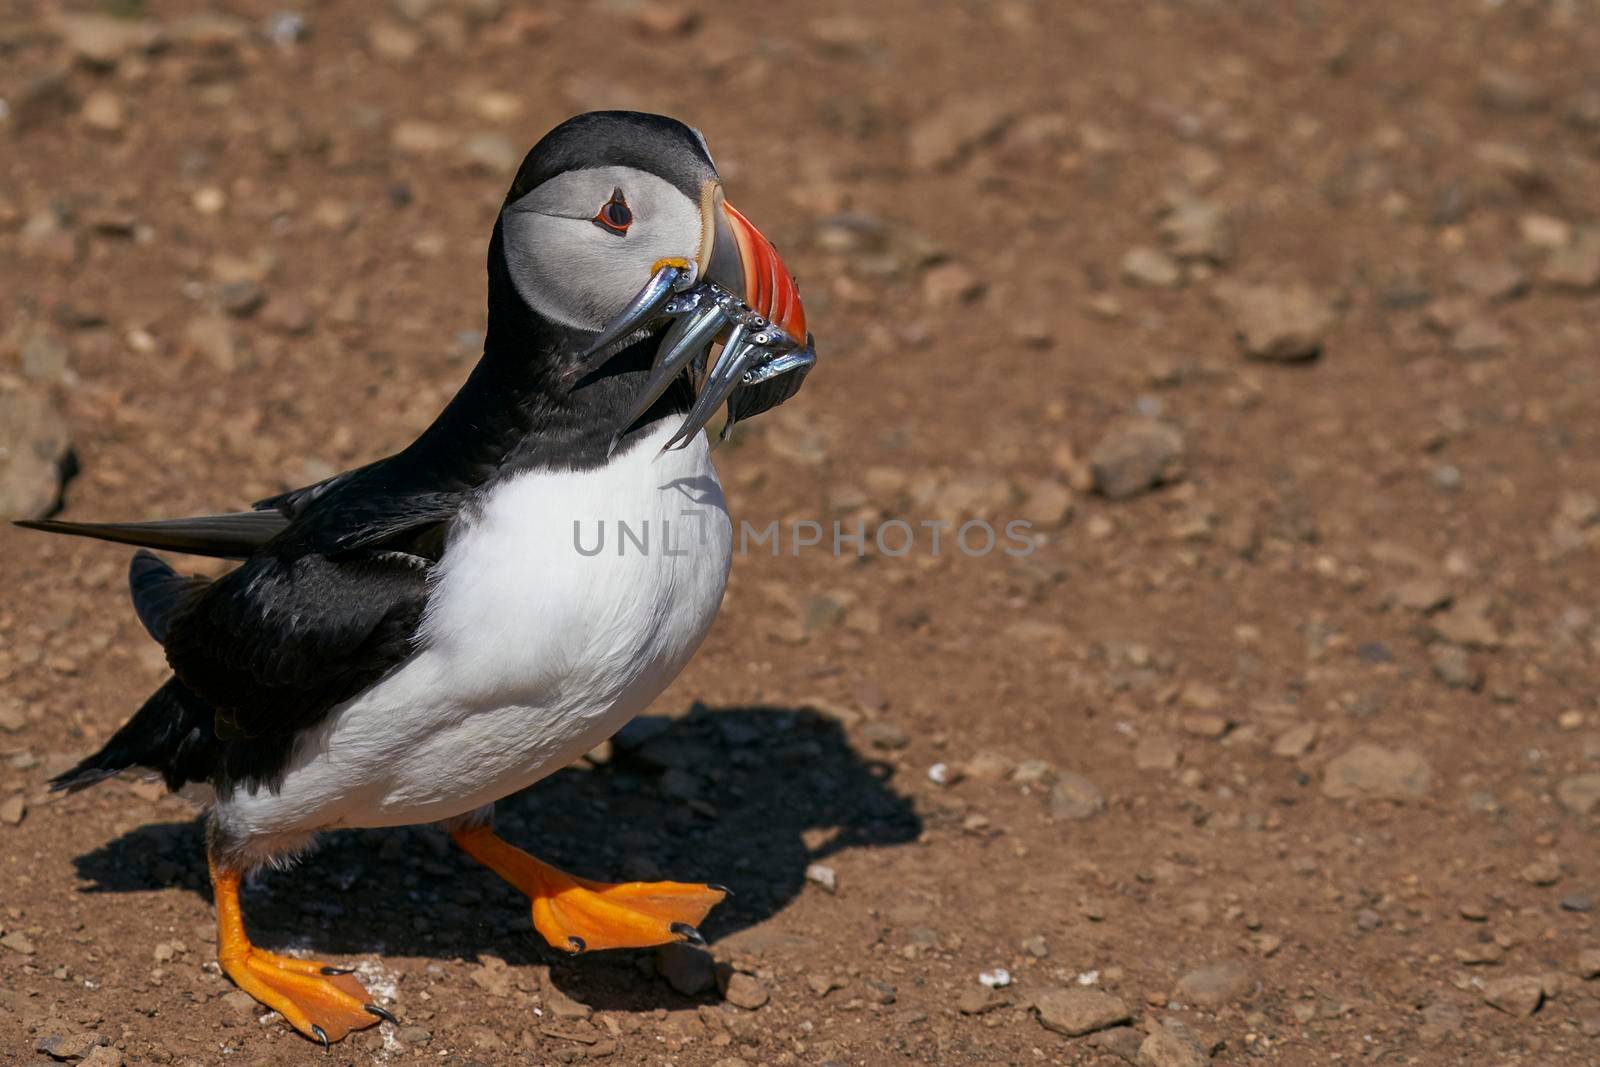 Atlantic puffin (Fratercula arctica) carrying sandeels in its beak to feed its chick on Skomer Island off the coast of Pembrokeshire in Wales, United Kingdom